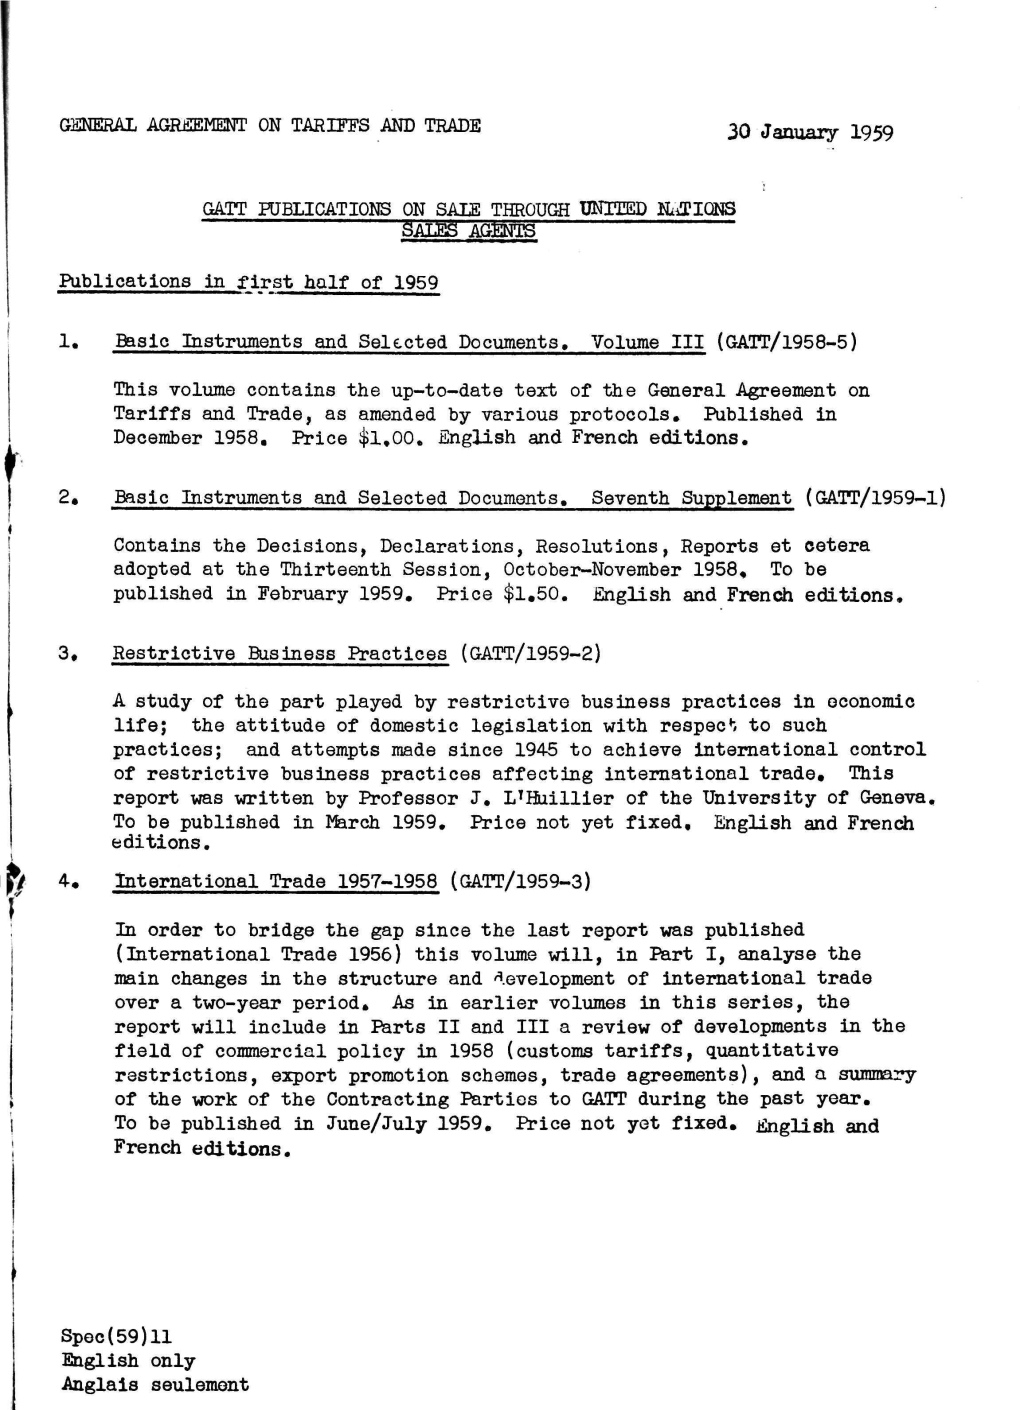 GENERAL AGREEMENT on TARIFFS and TRADE 30 January 1959